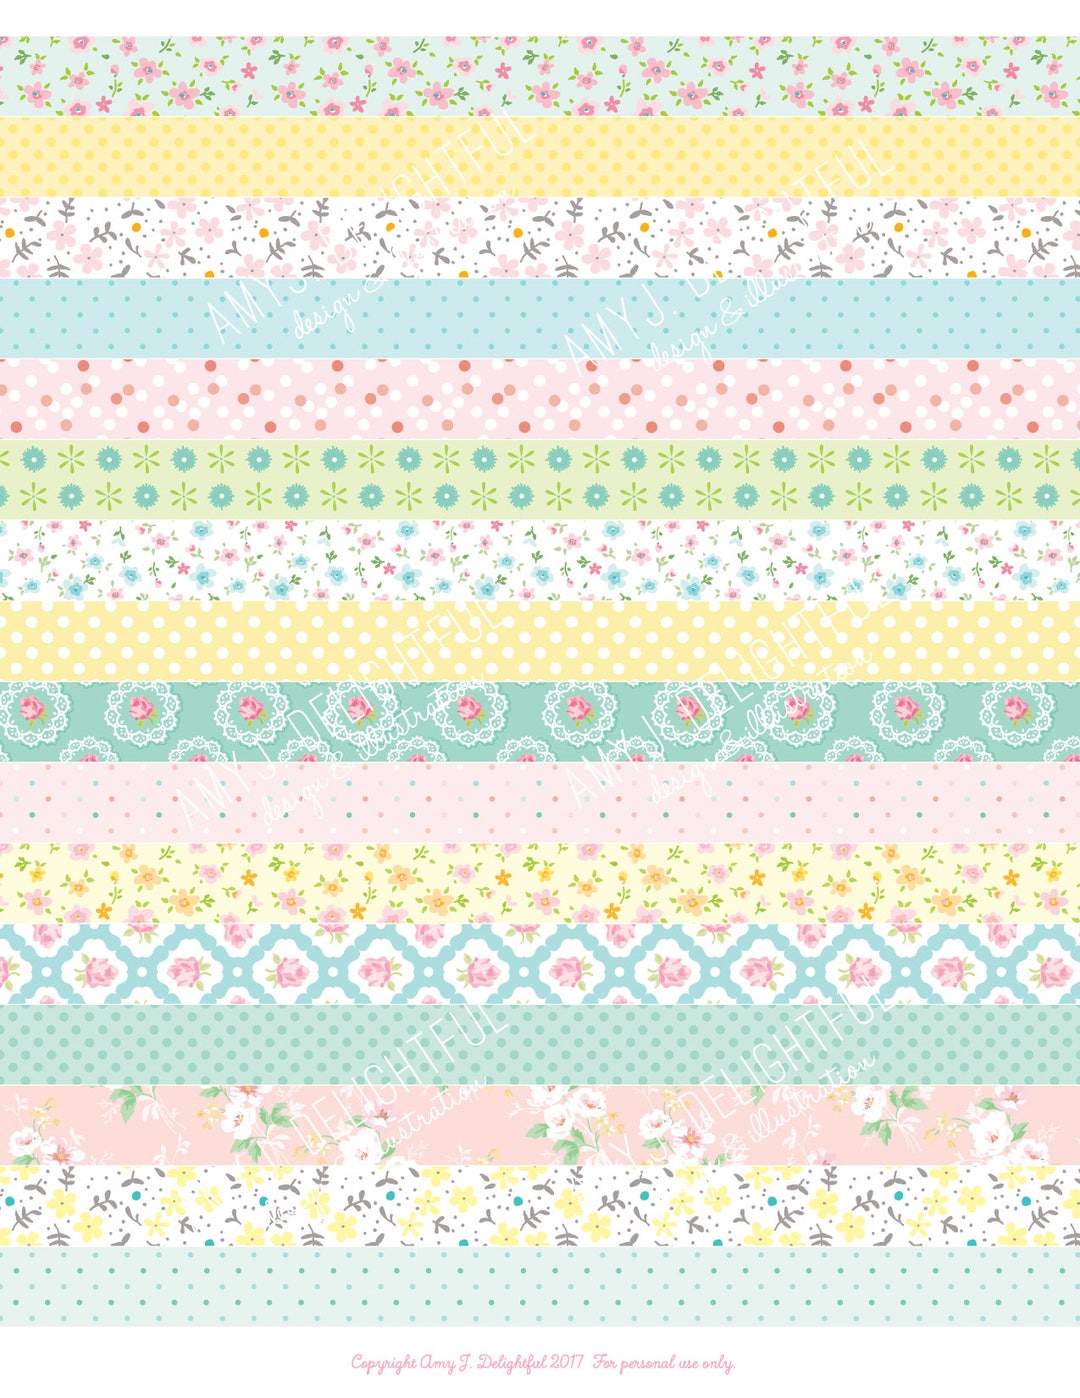 Printable Cute Bunny Washi ‘Tape’ || Printable Digital Washi | Printable  Stickers | Kawaii Stickers | Journal Stickers | Planner Stickers